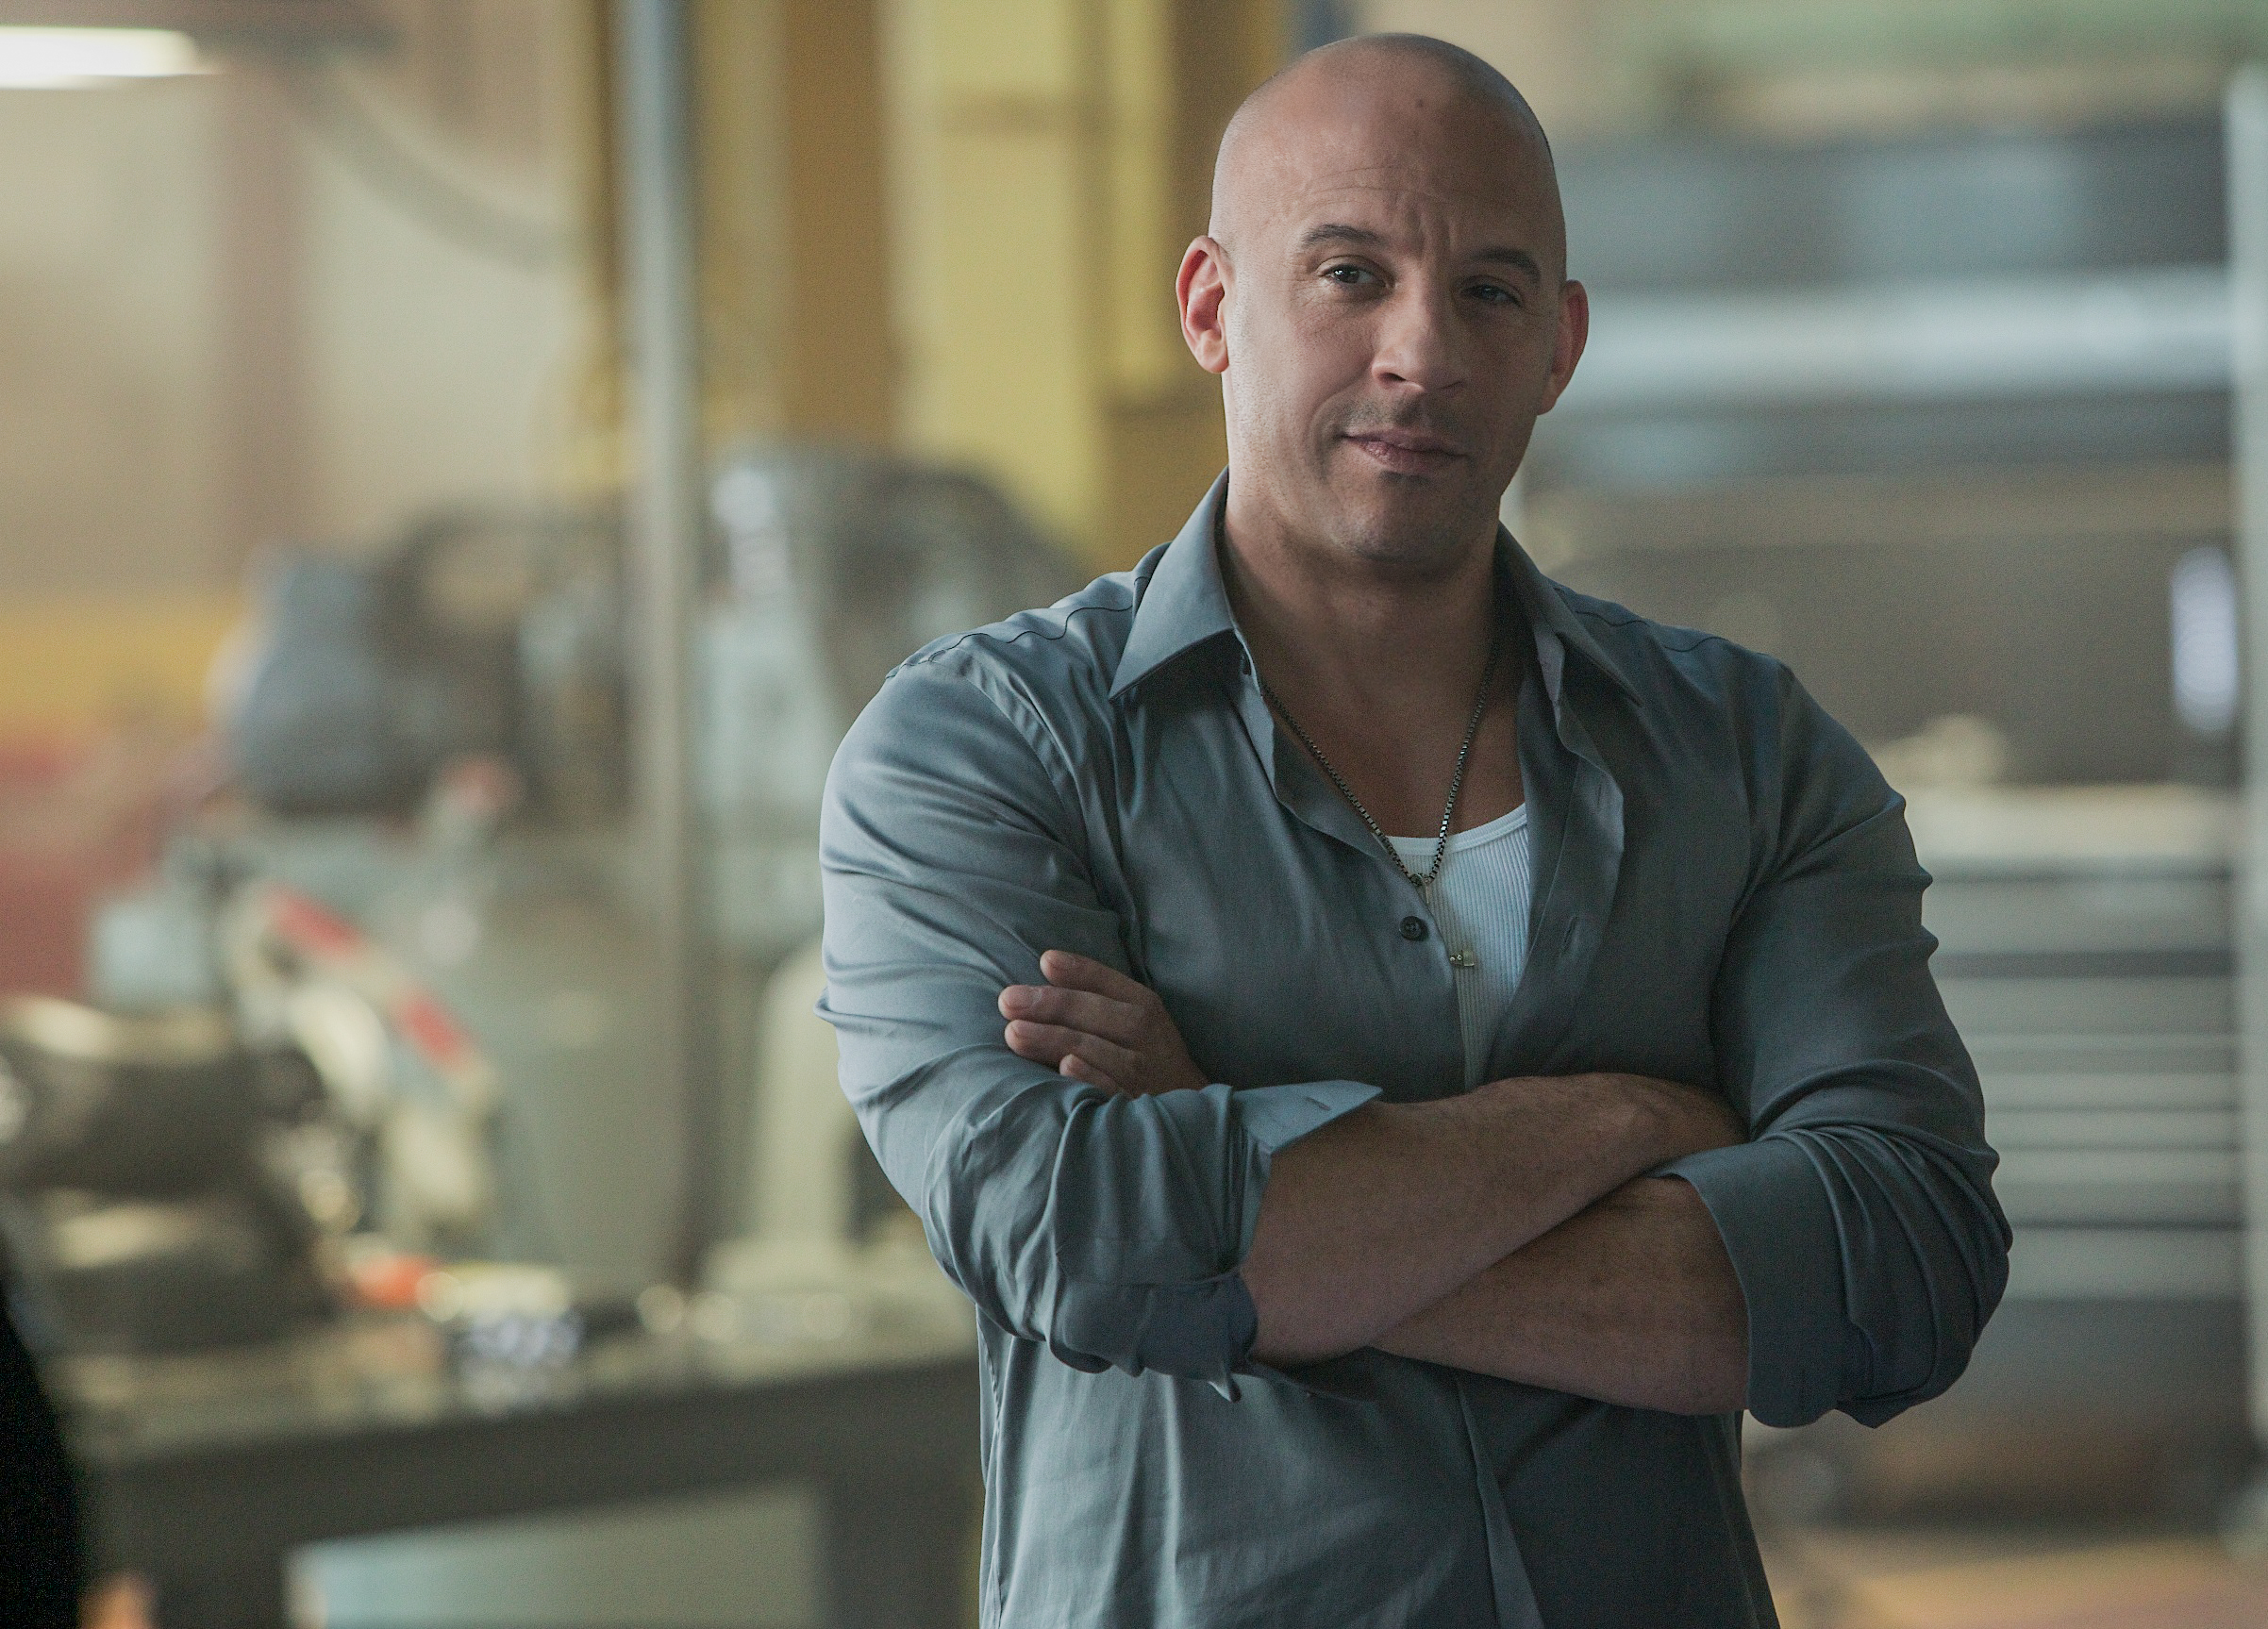 Vin Diesel Shared A Behind-The-Scenes Clip Of A Fast 8 Action Sequence and It is Absolutely Insane